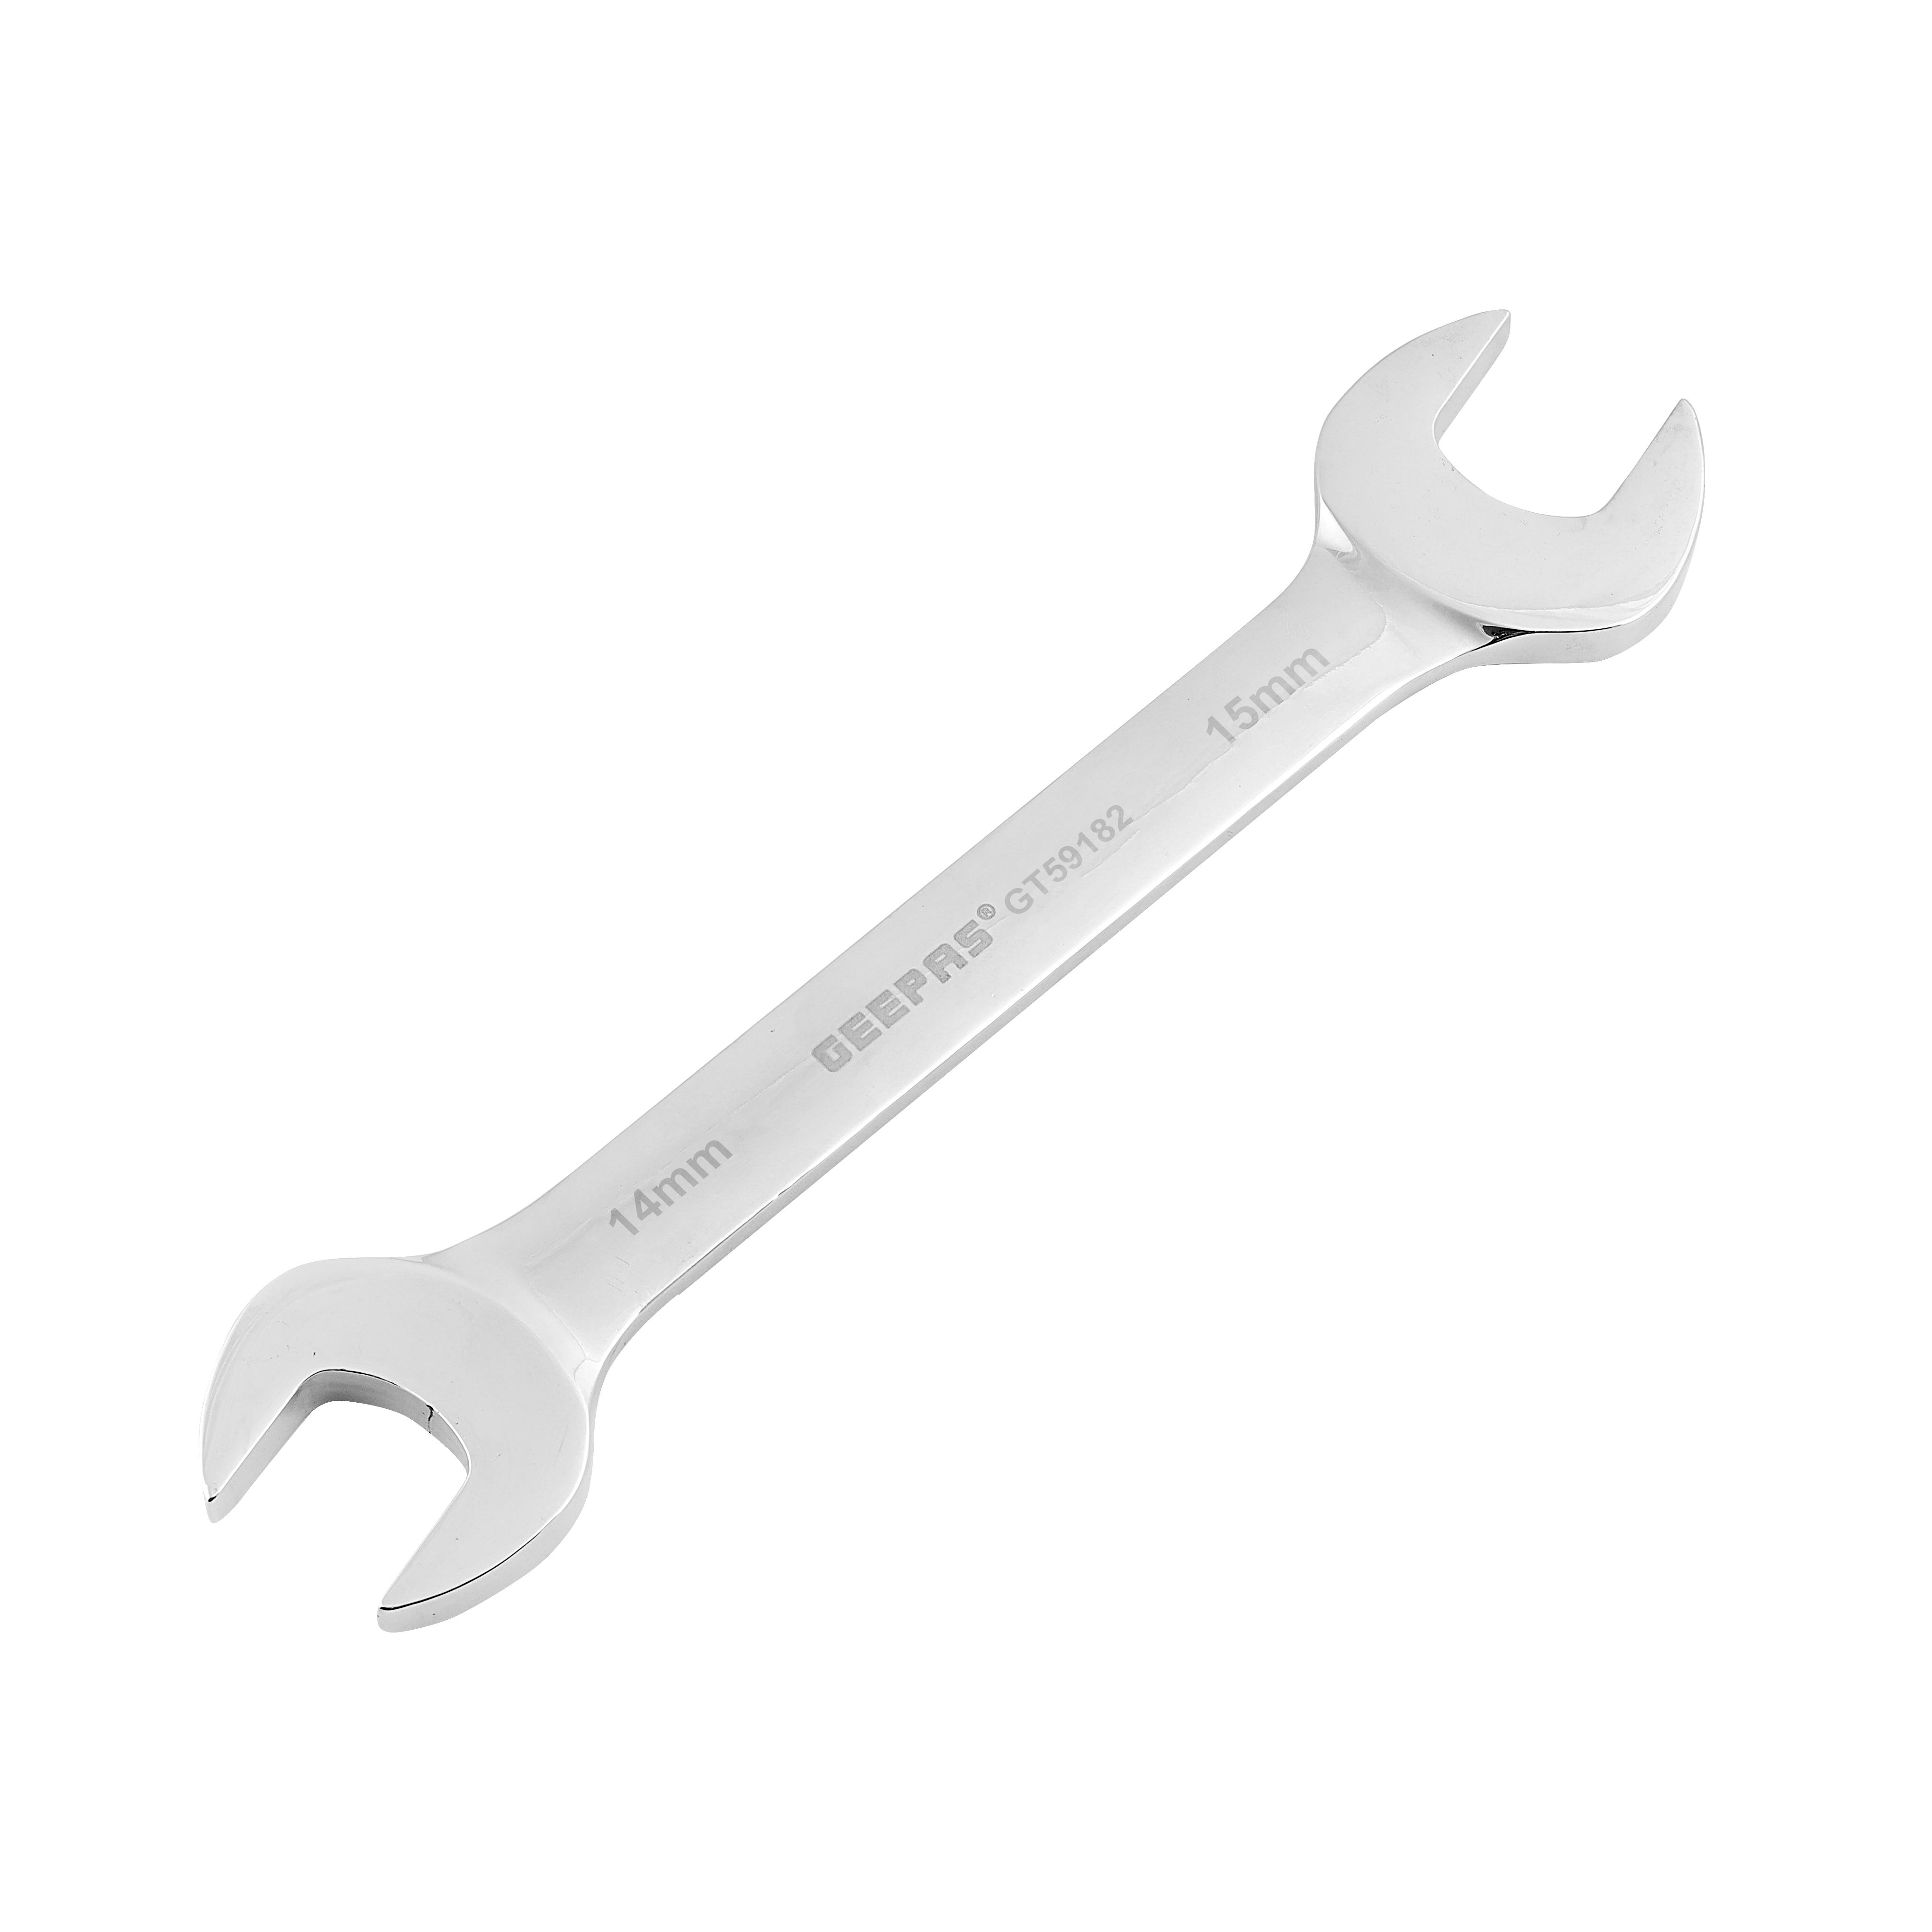 TRUSCO Mirror-type Double Open-end Spanner TTDS-3032 